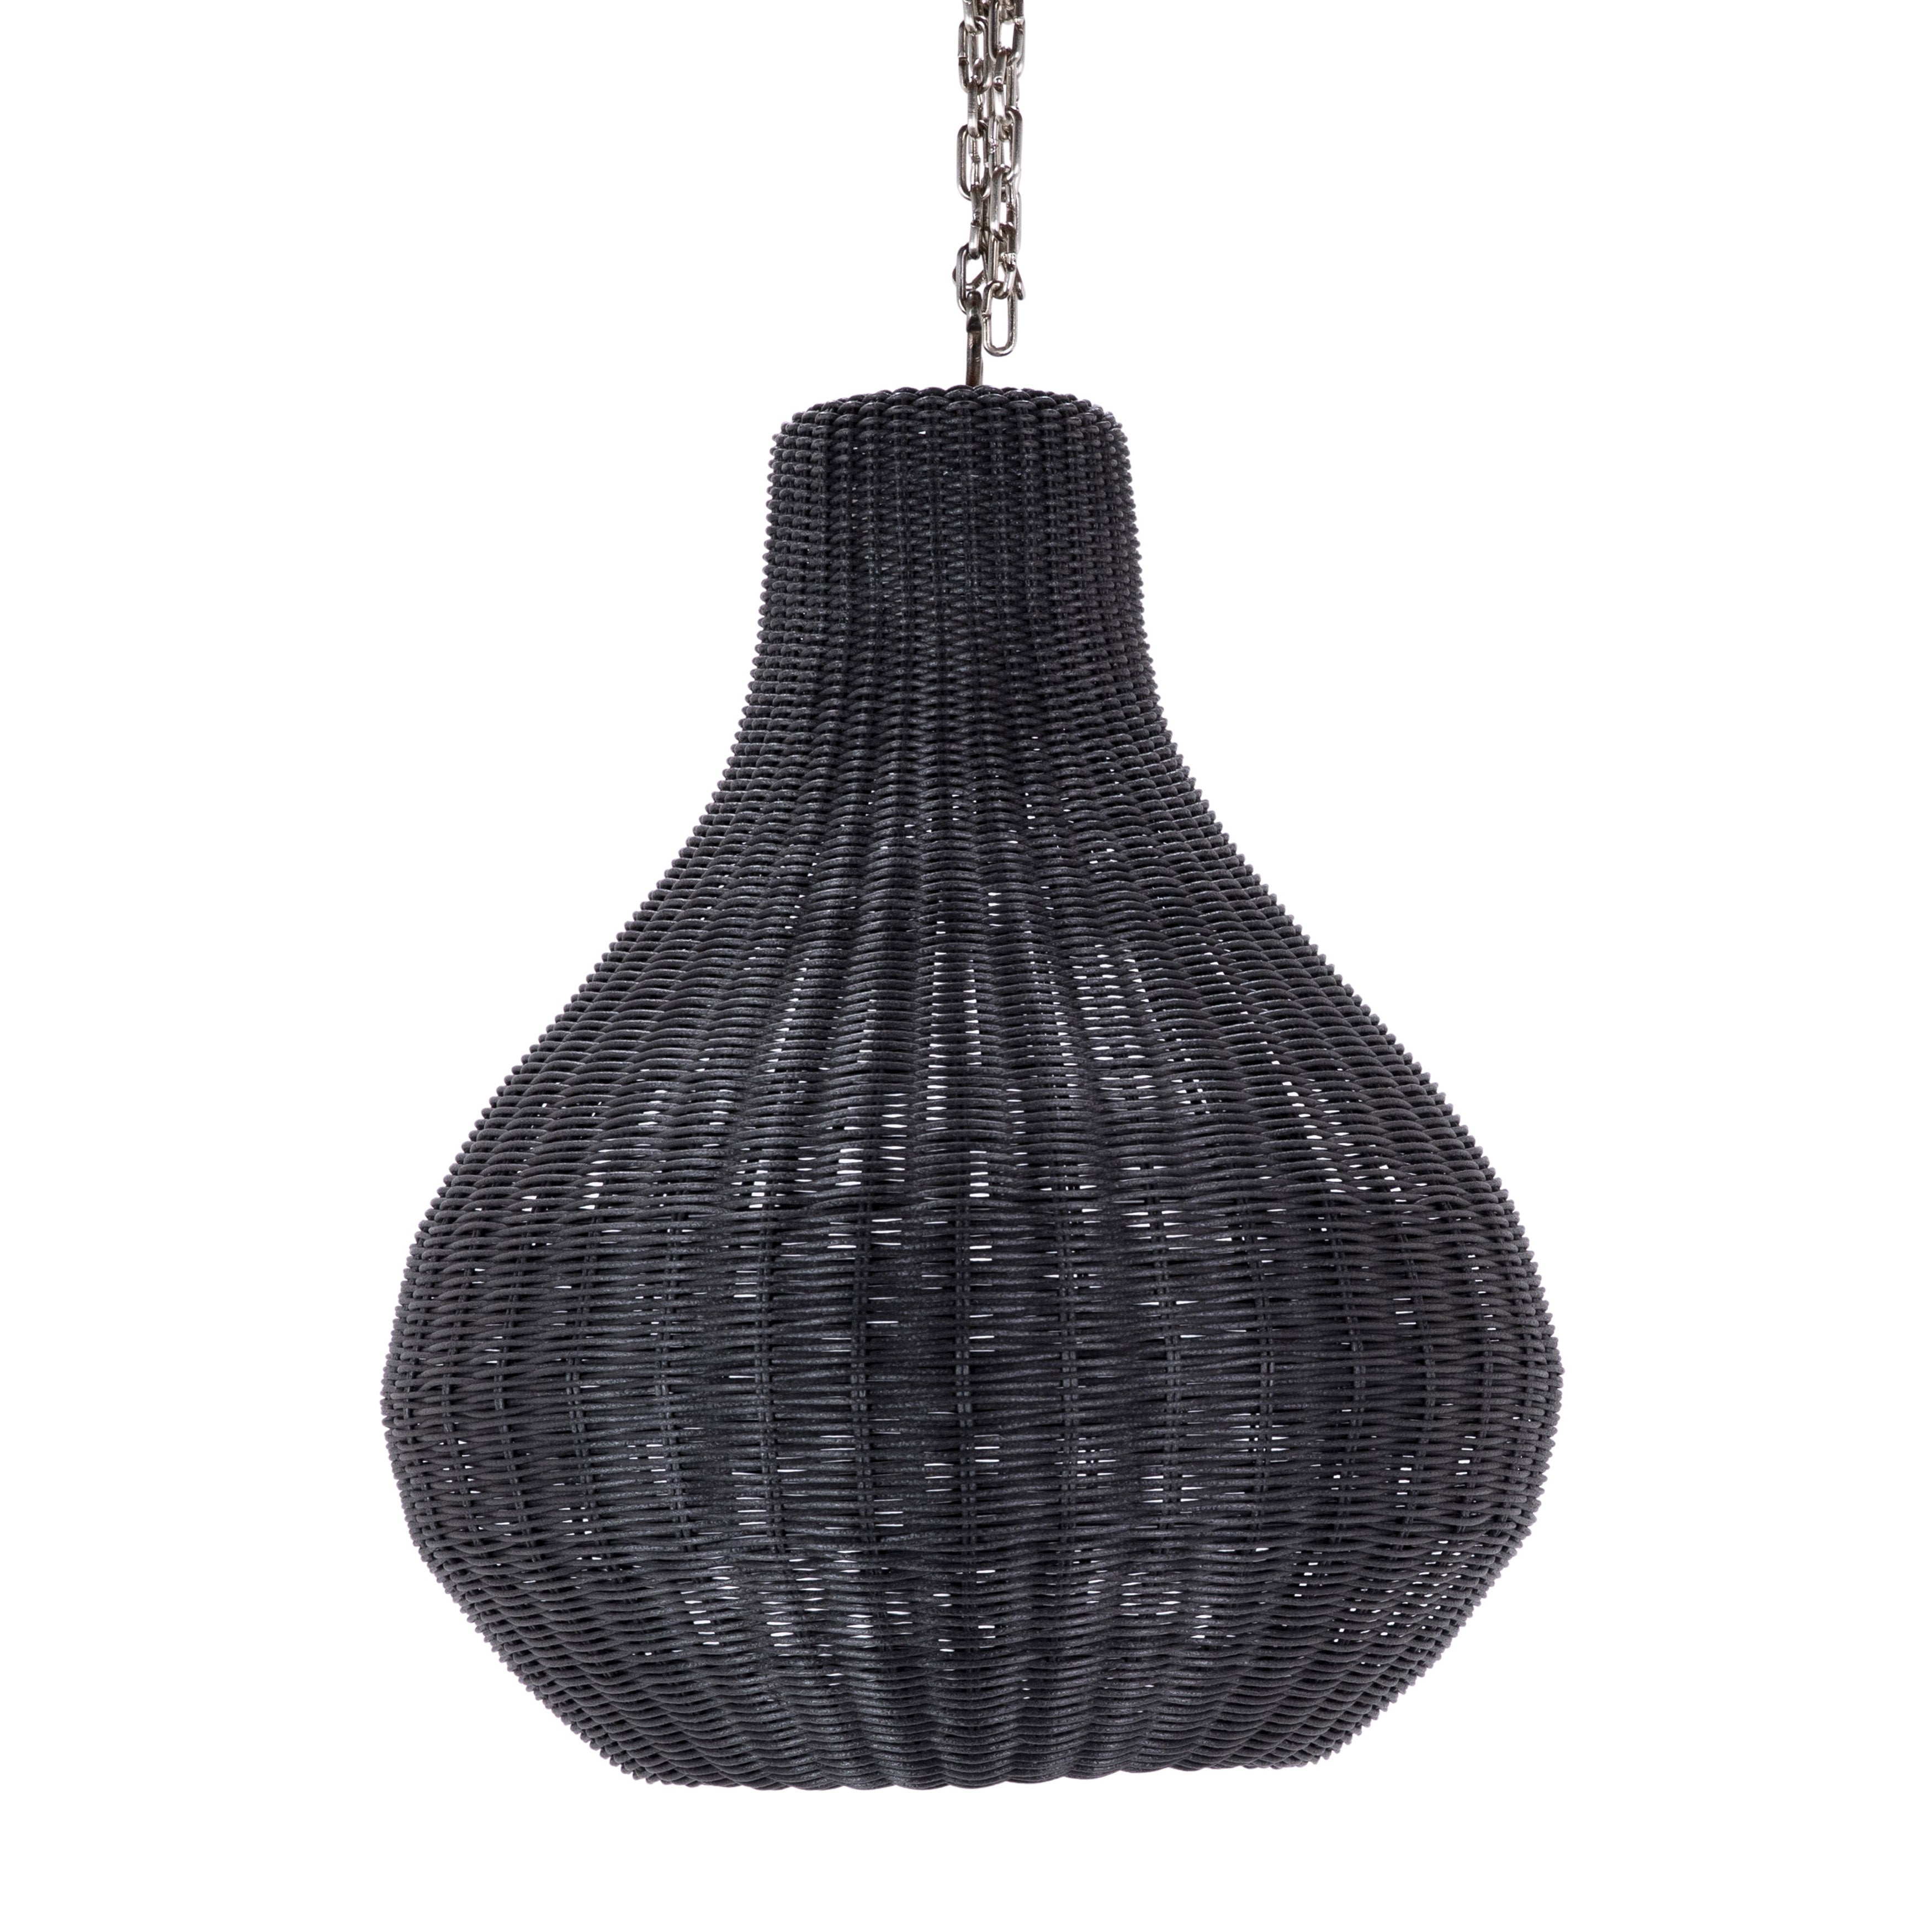 Crafted from a resin weave rattan in a stunning black finish, this 22” high and 18” wide pendant light adds inviting style and softly diffused ambiance to any room. It works well grouped above a dining table, on its own in a reading nook, or anywhere you want a relaxed touch. The perfect option for a warm and relaxed ambiance.Depth : 18 in Amethyst Home provides interior design, new home construction design consulting, vintage area rugs, and lighting in the Seattle metro area.